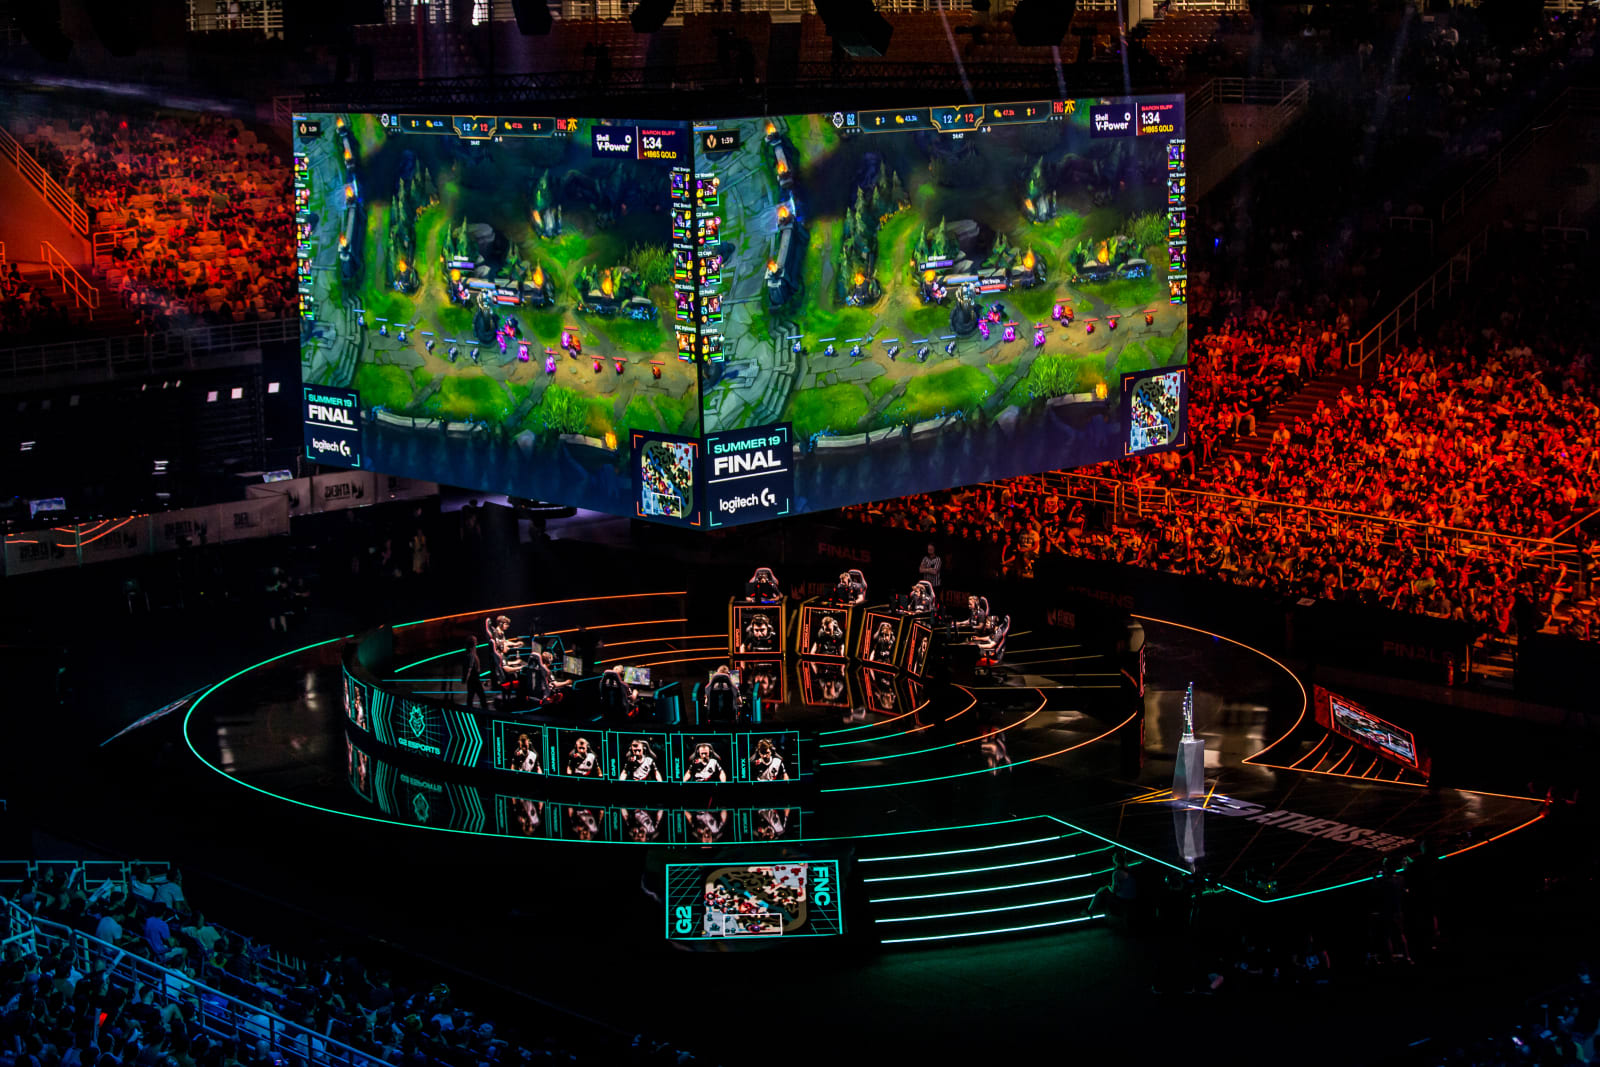 Ugh: Riot urges 'League of Legends' pros to keep quiet on 'sensitive' issues Dims?quality=85&image_uri=https%3A%2F%2Fo.aolcdn.com%2Fimages%2Fdims%3Fcrop%3D5351%252C3567%252C0%252C0%26quality%3D85%26format%3Djpg%26resize%3D1600%252C1067%26image_uri%3Dhttps%253A%252F%252Fs.yimg